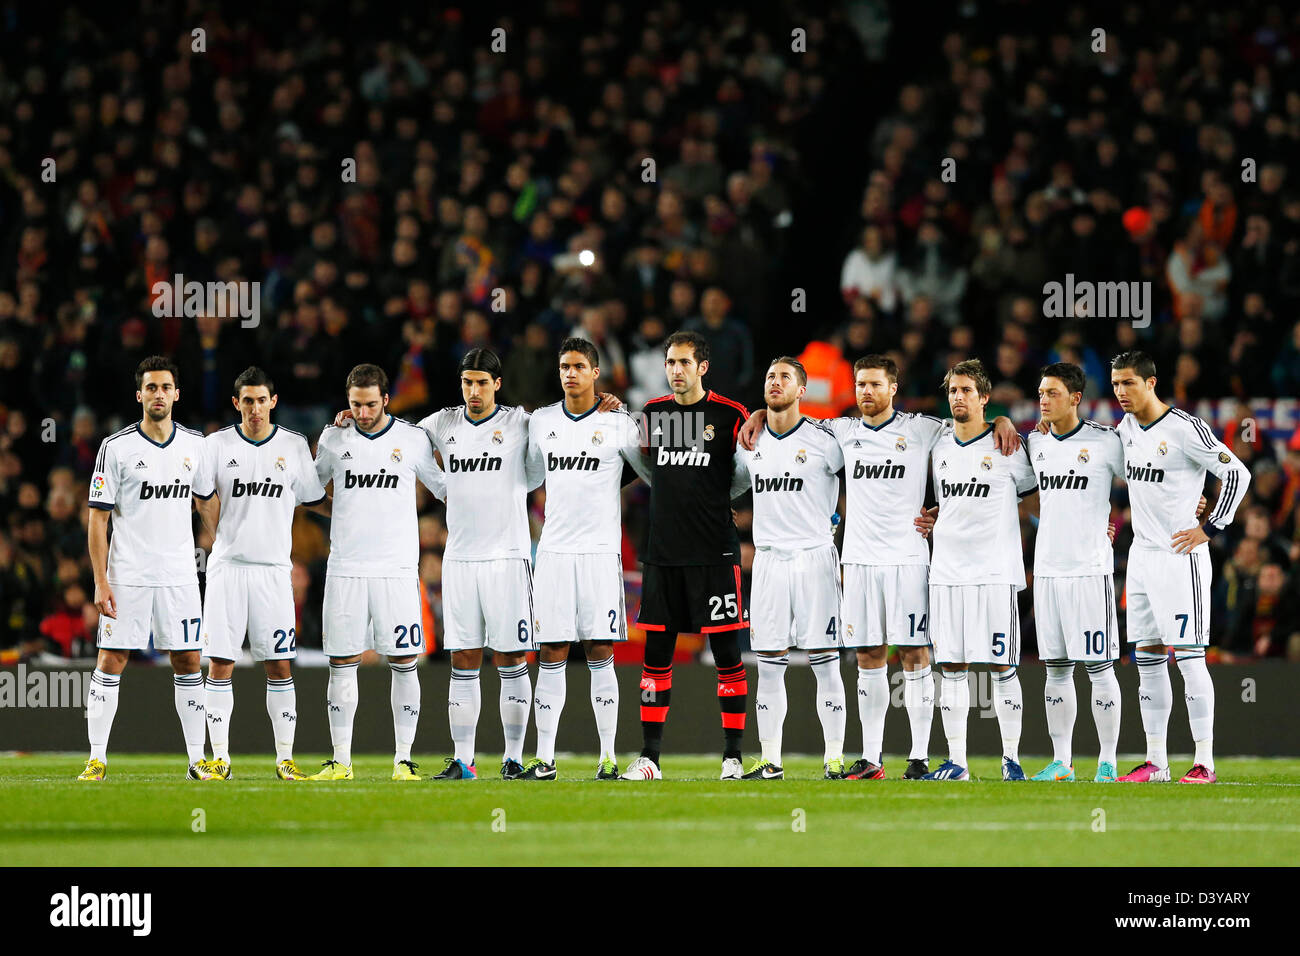 Barcelona, Spain. 26th February 2013. Real Madrid team group line-up, FEBRUARY 26, 2013 - Football / Soccer : Copa del Rey Semi-final 2nd leg match between FC Barcelona 1-3 Real Madrid at Camp Nou stadium in Barcelona, Spain. (Photo by D.Nakashima/AFLO/Alamy Live News) Stock Photo